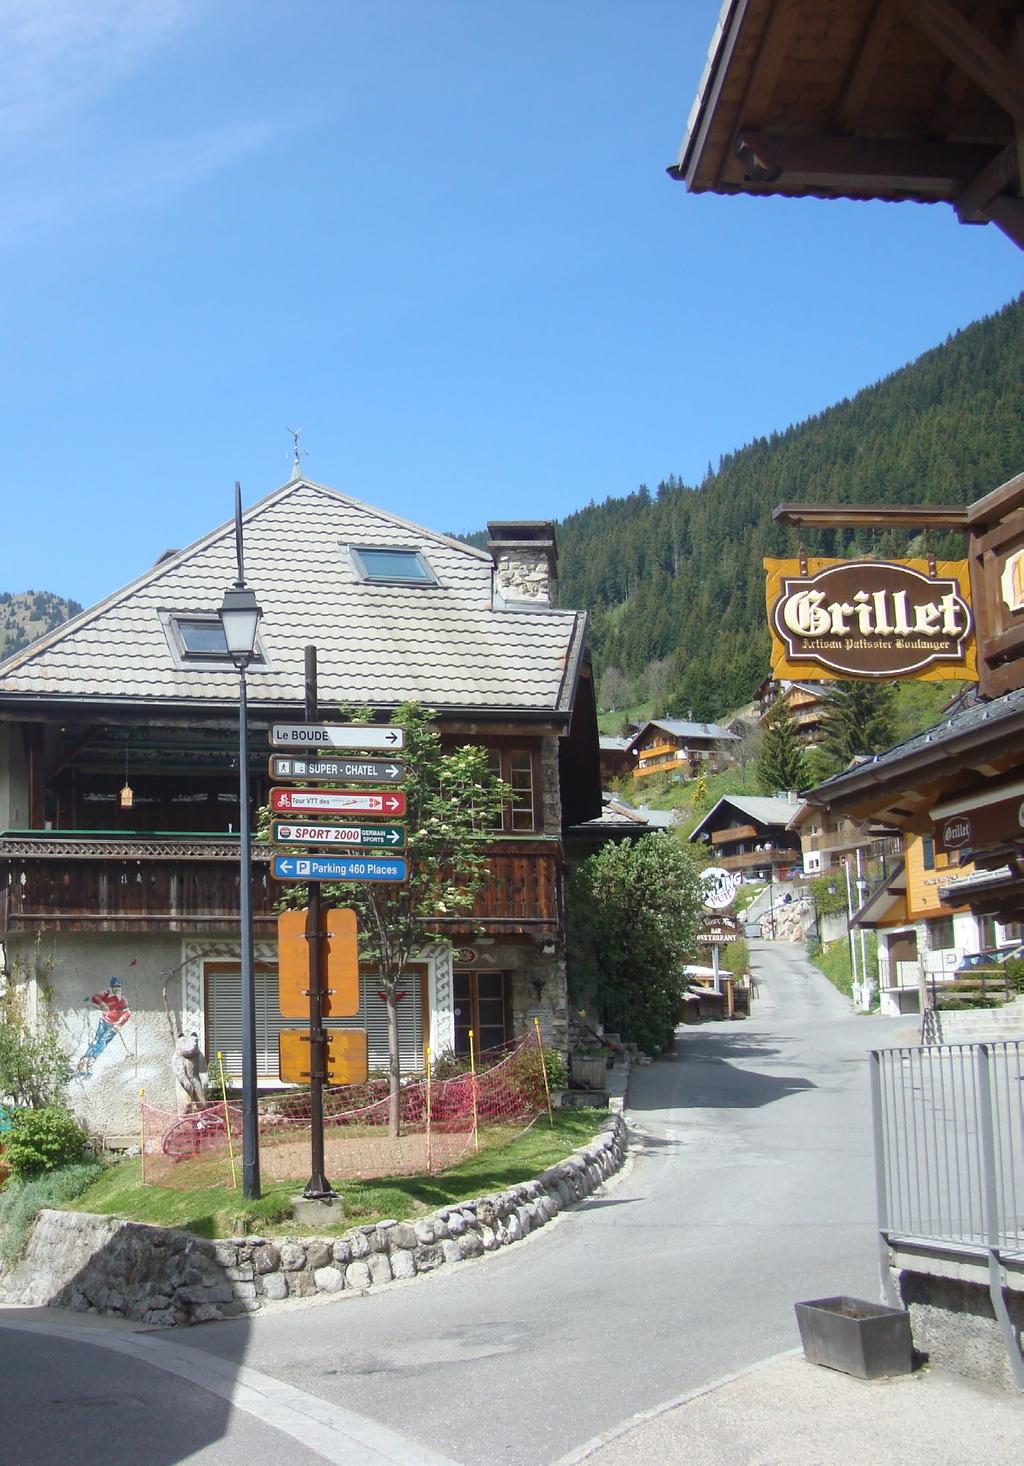 Chatel Pretty and rustic alpine village Recently received great improvements to its infrastructure with new lifts